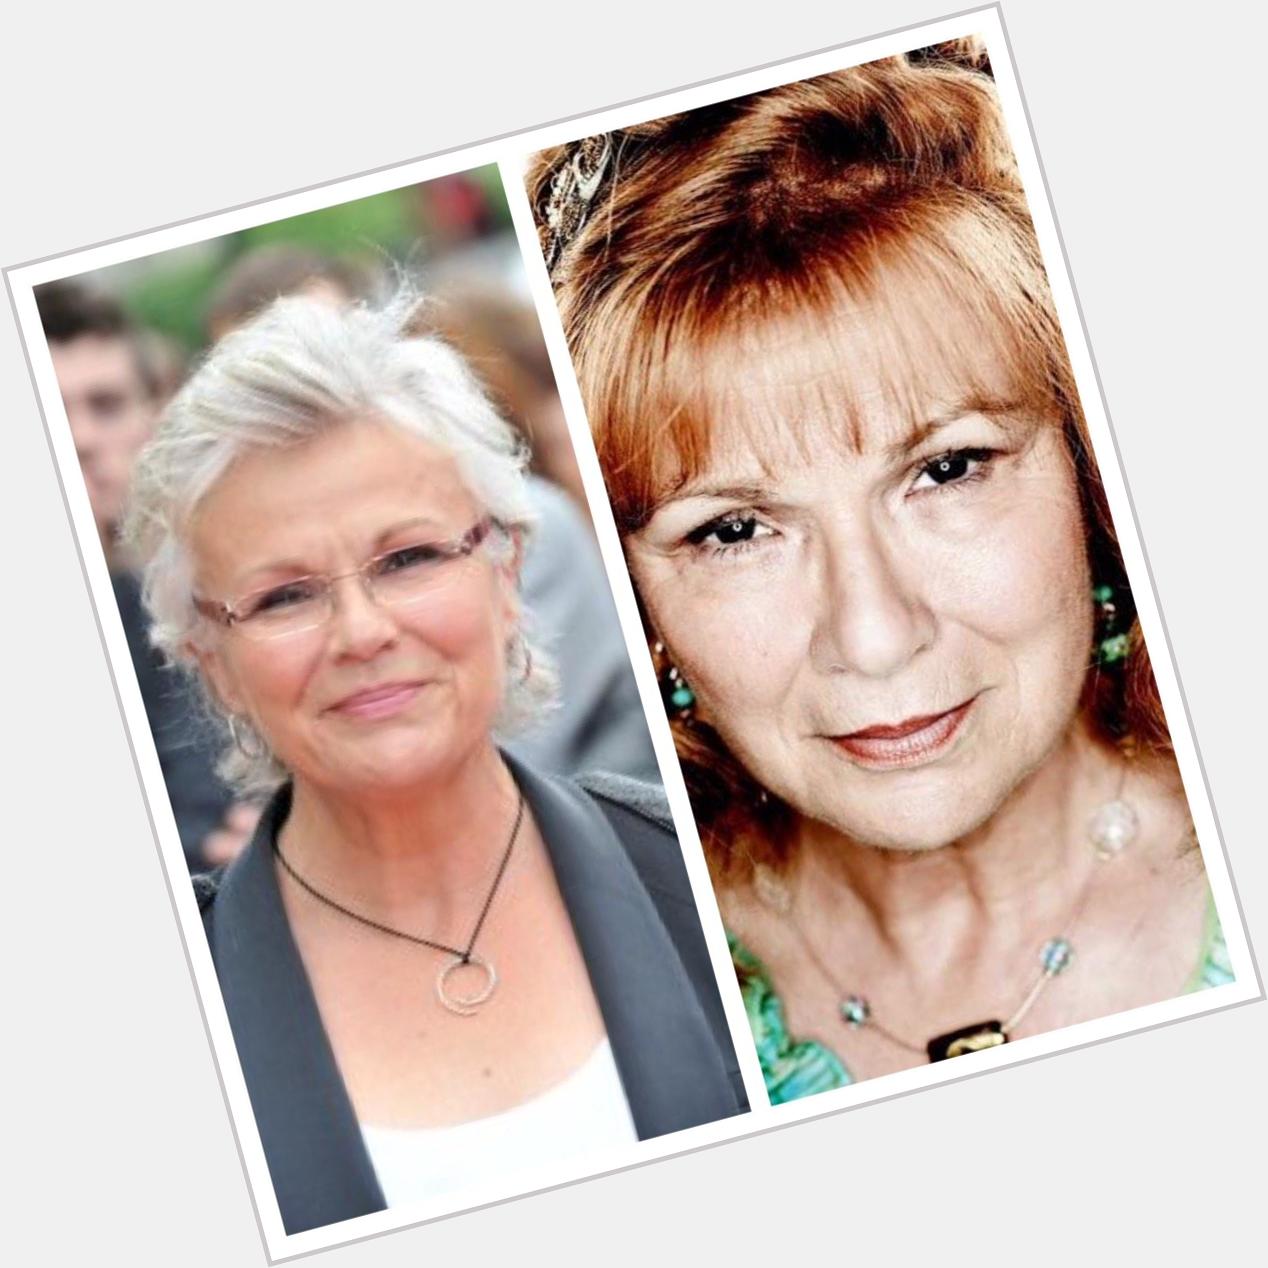 Feb 22: Happy Birthday, Julie Walters! She played Molly Weasley in the films. 